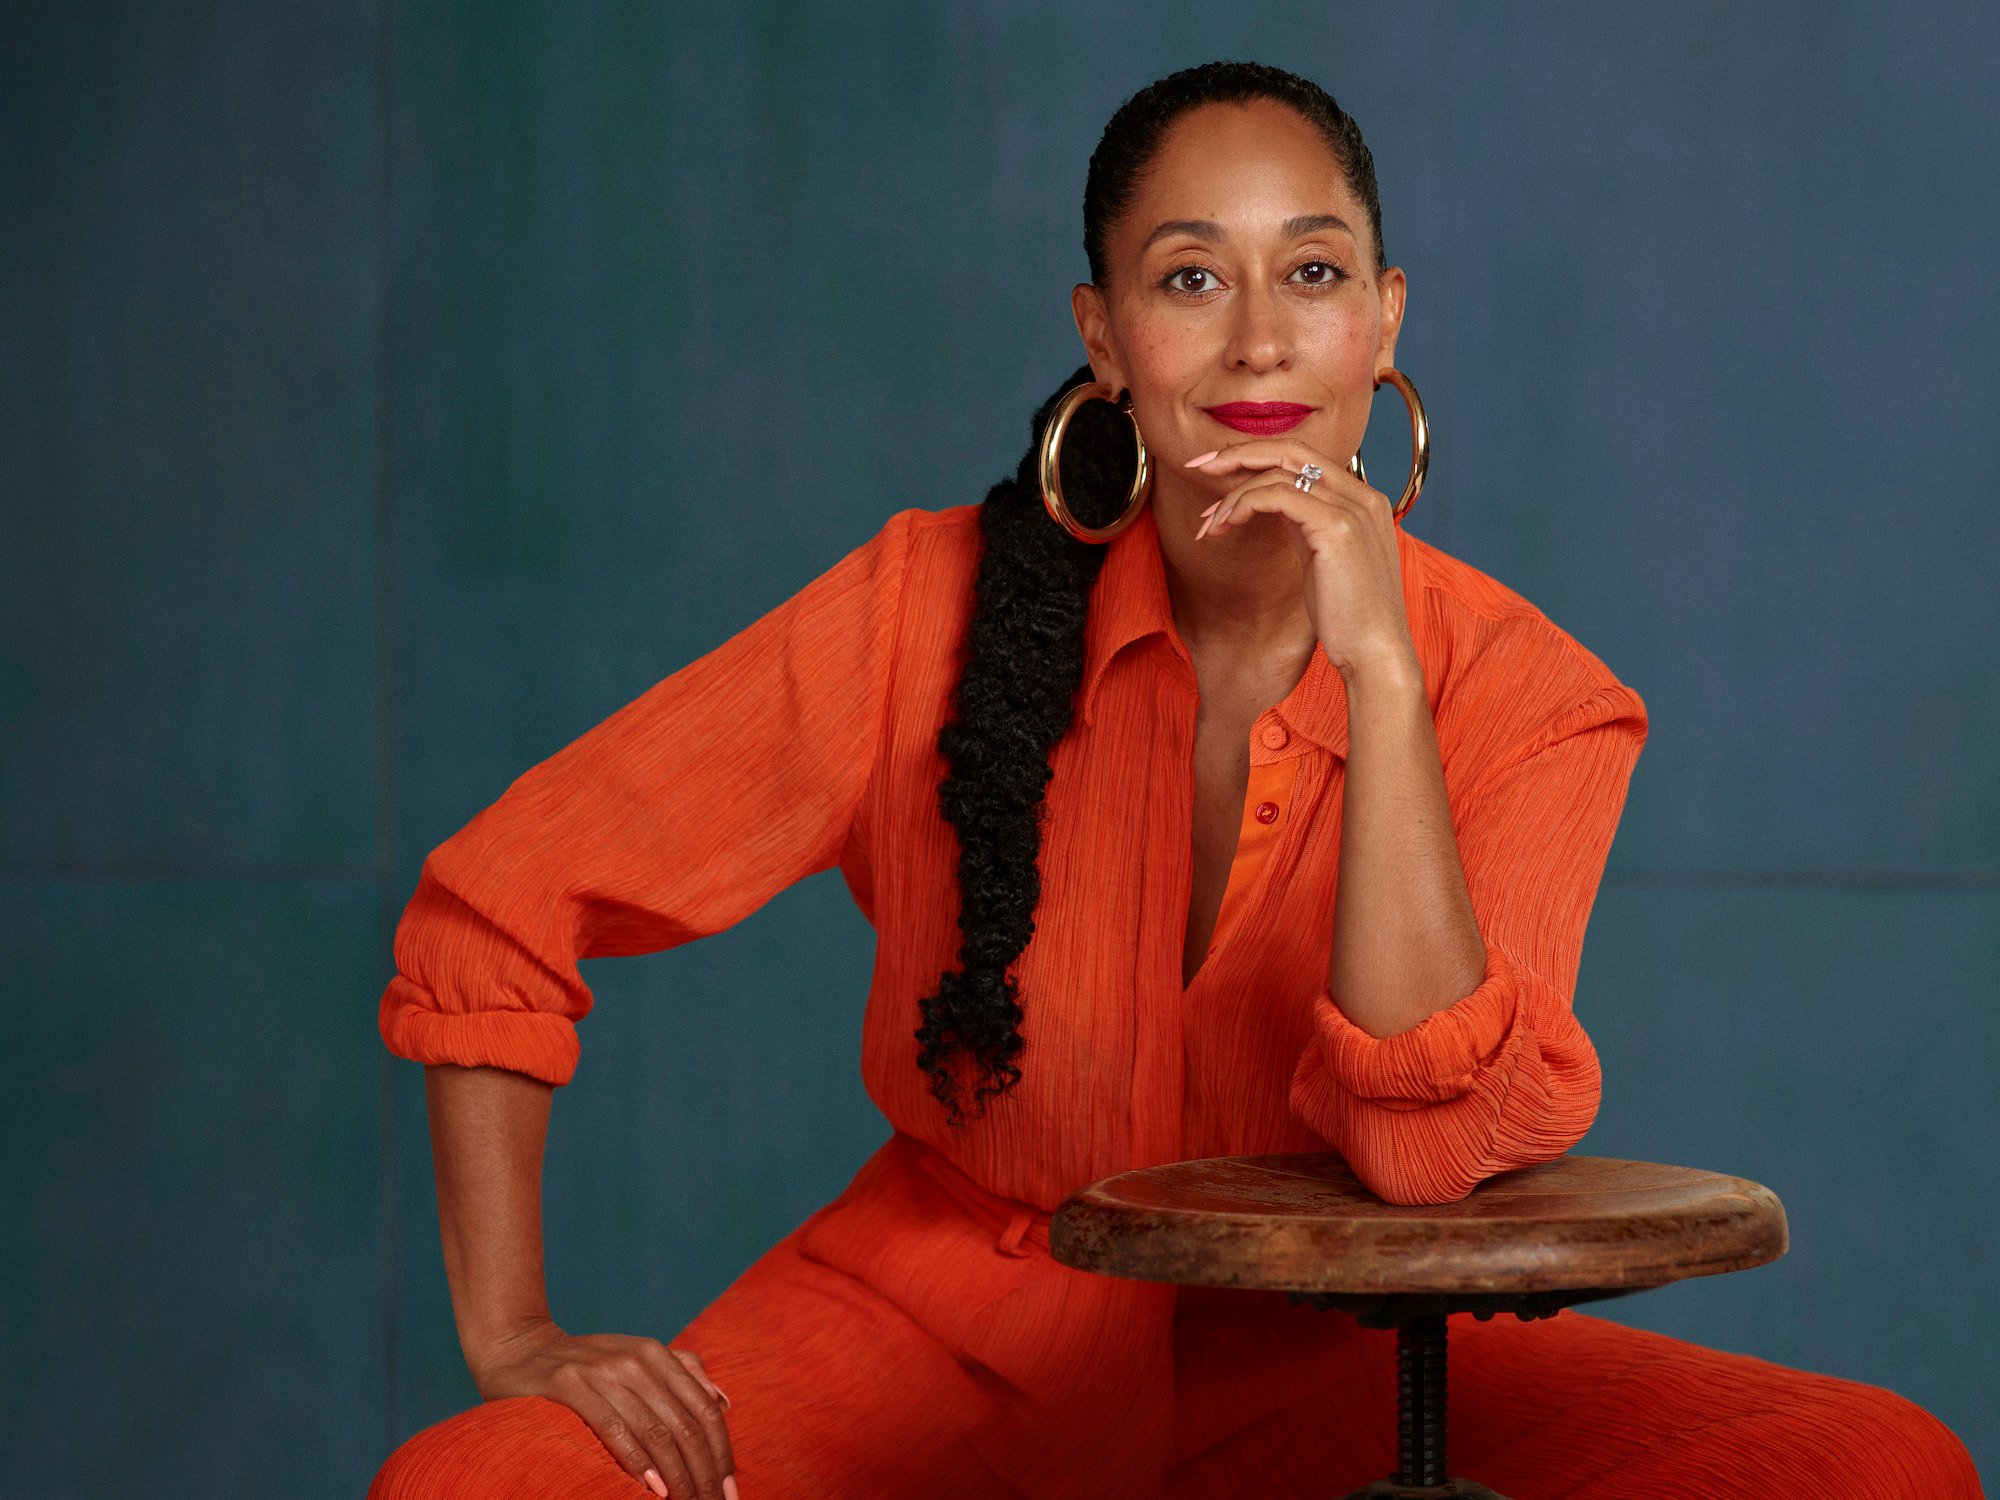 Tracee Ellis Ross posing in an orange outfit for ABC's 'Black-ish' Season 7 promo shoot